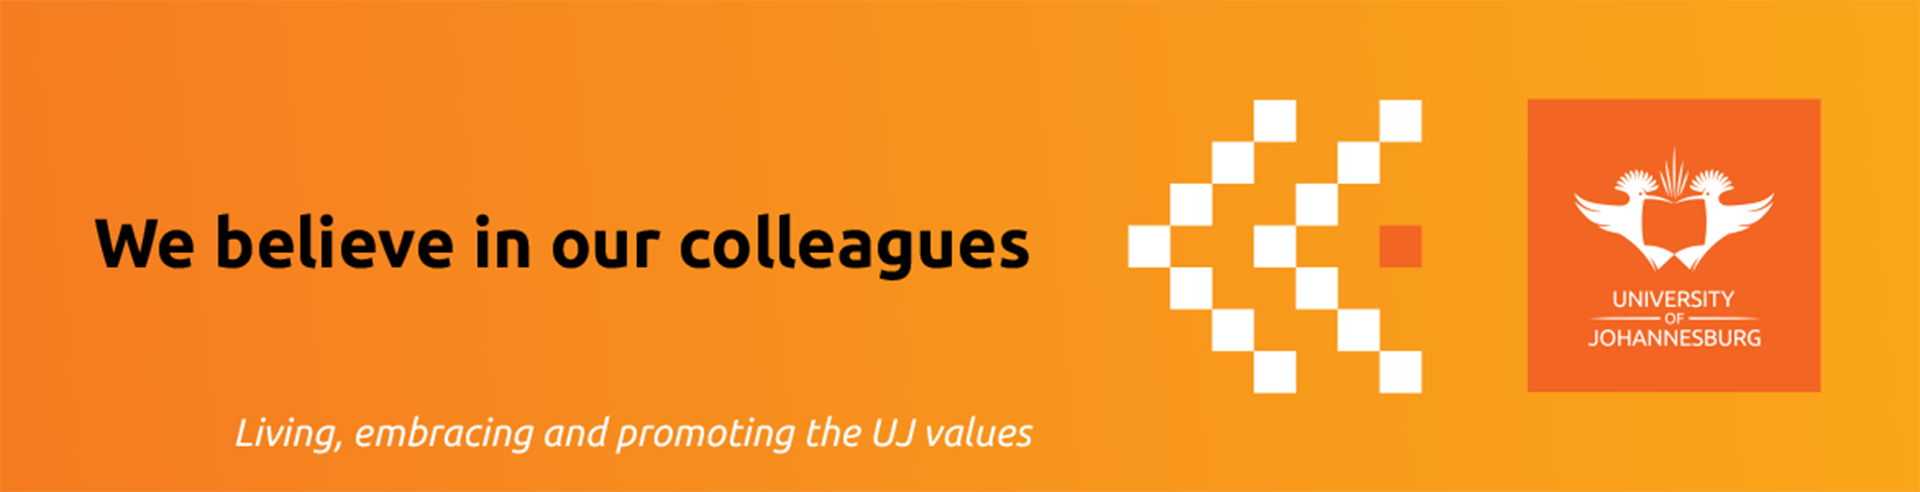 Uj Values Expressions Posters 2020 Ulink 1170x300mm 28